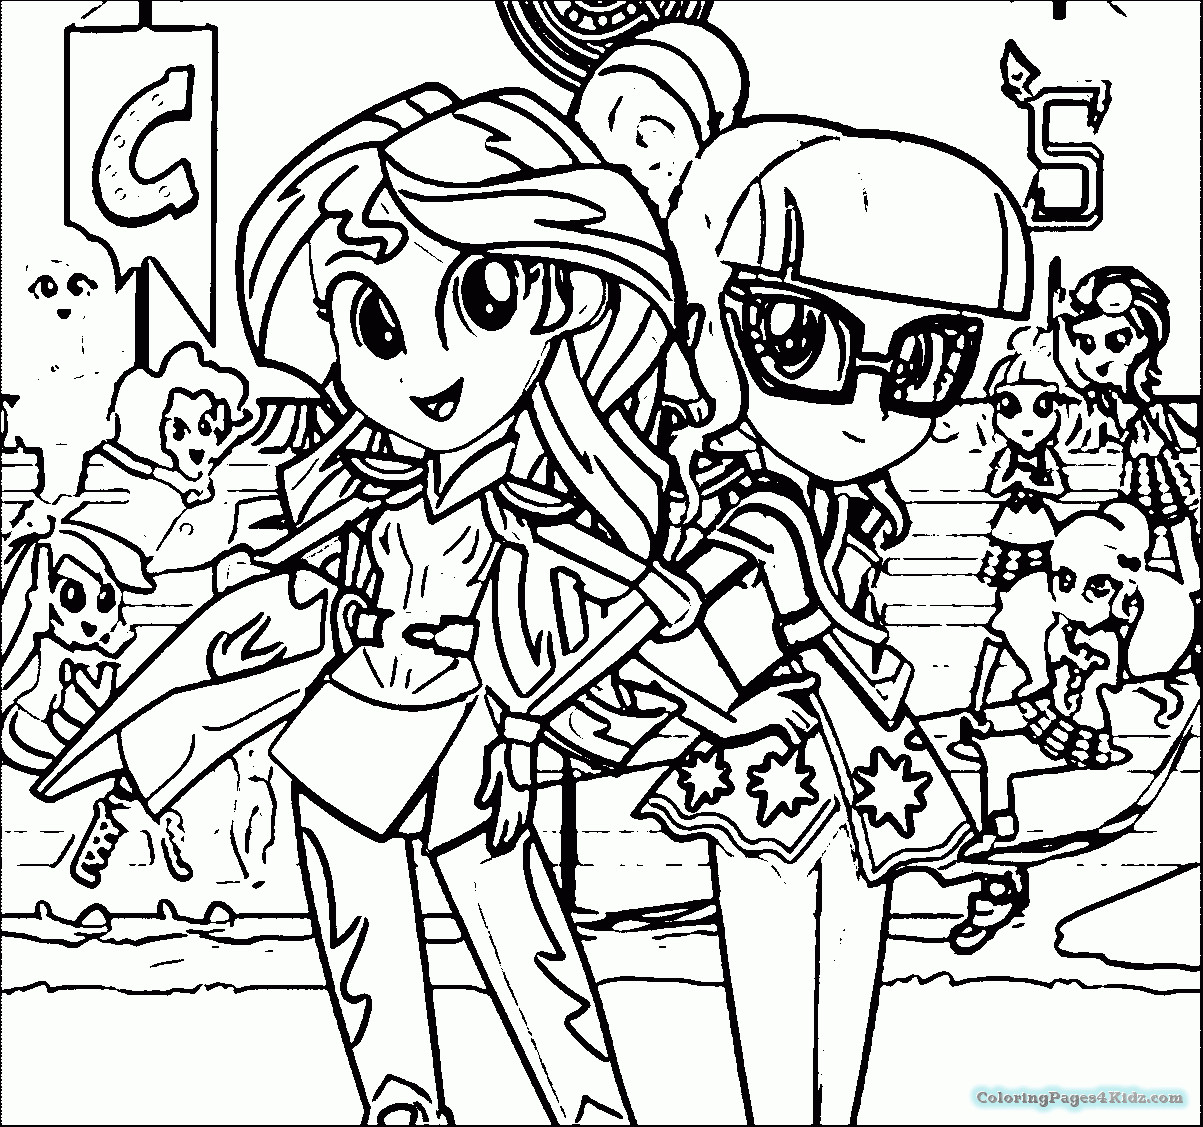 Equestria Girls Sunset Shimmer Coloring Pages
 Mlp Sunset Shimmer Coloring Pages Coloring Pages